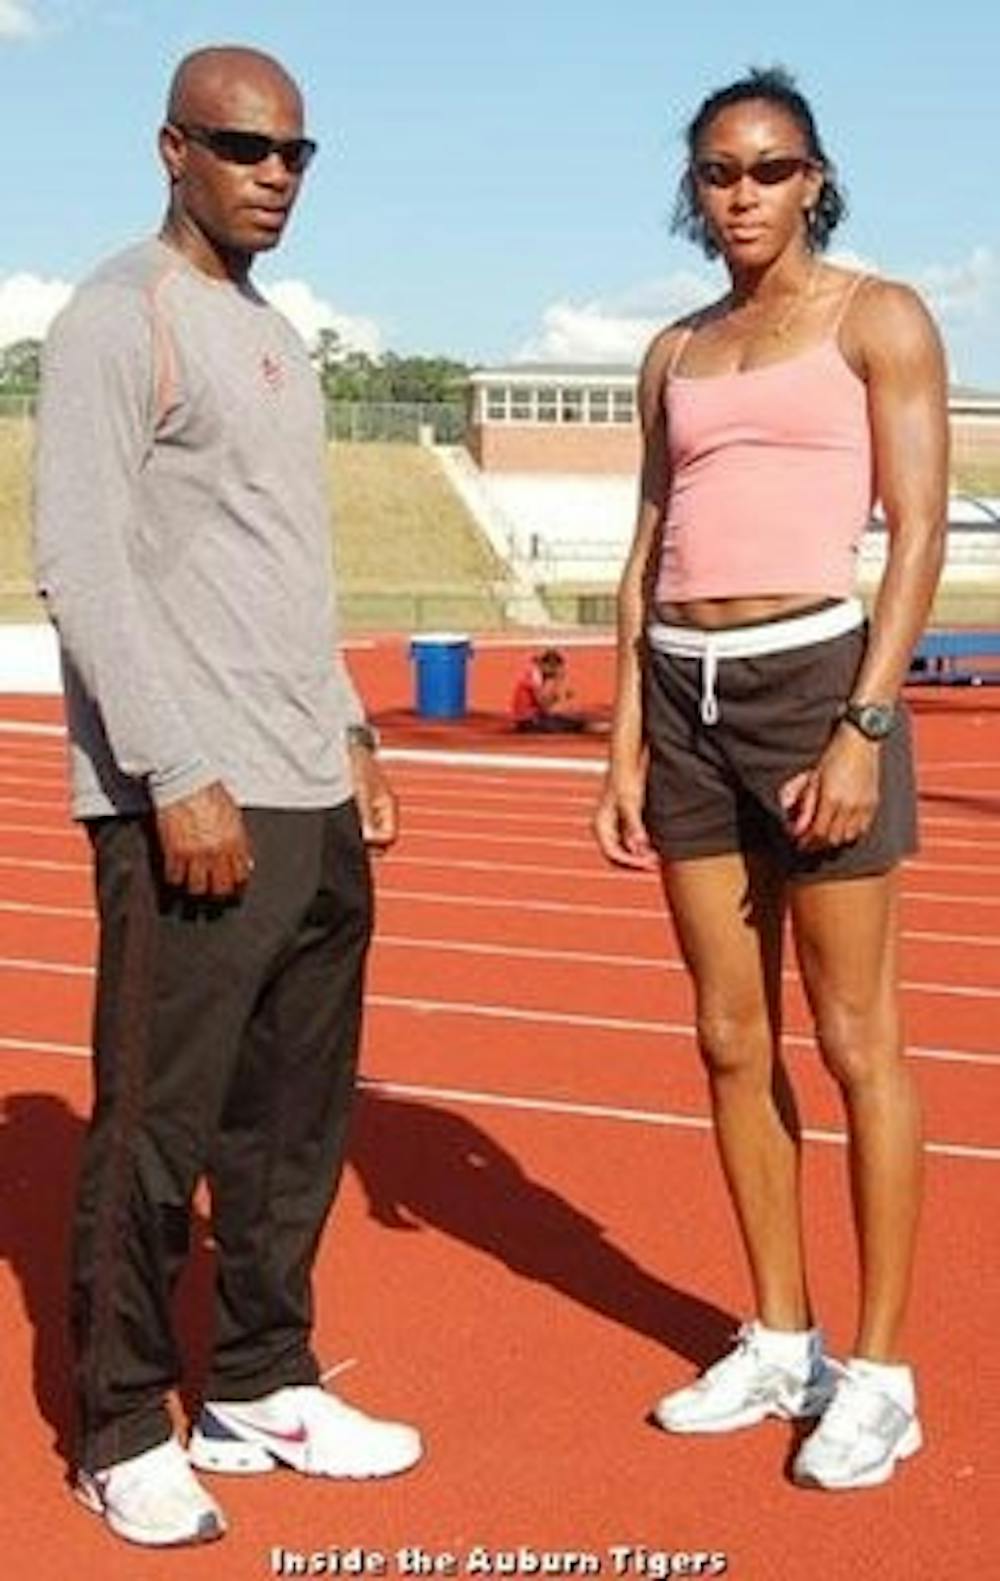 Henry Rolle poses with one of his former Auburn athletes, Markita James, who was on the 2006 Auburn track team. (Courtesy of Inside the Auburn Tigers)